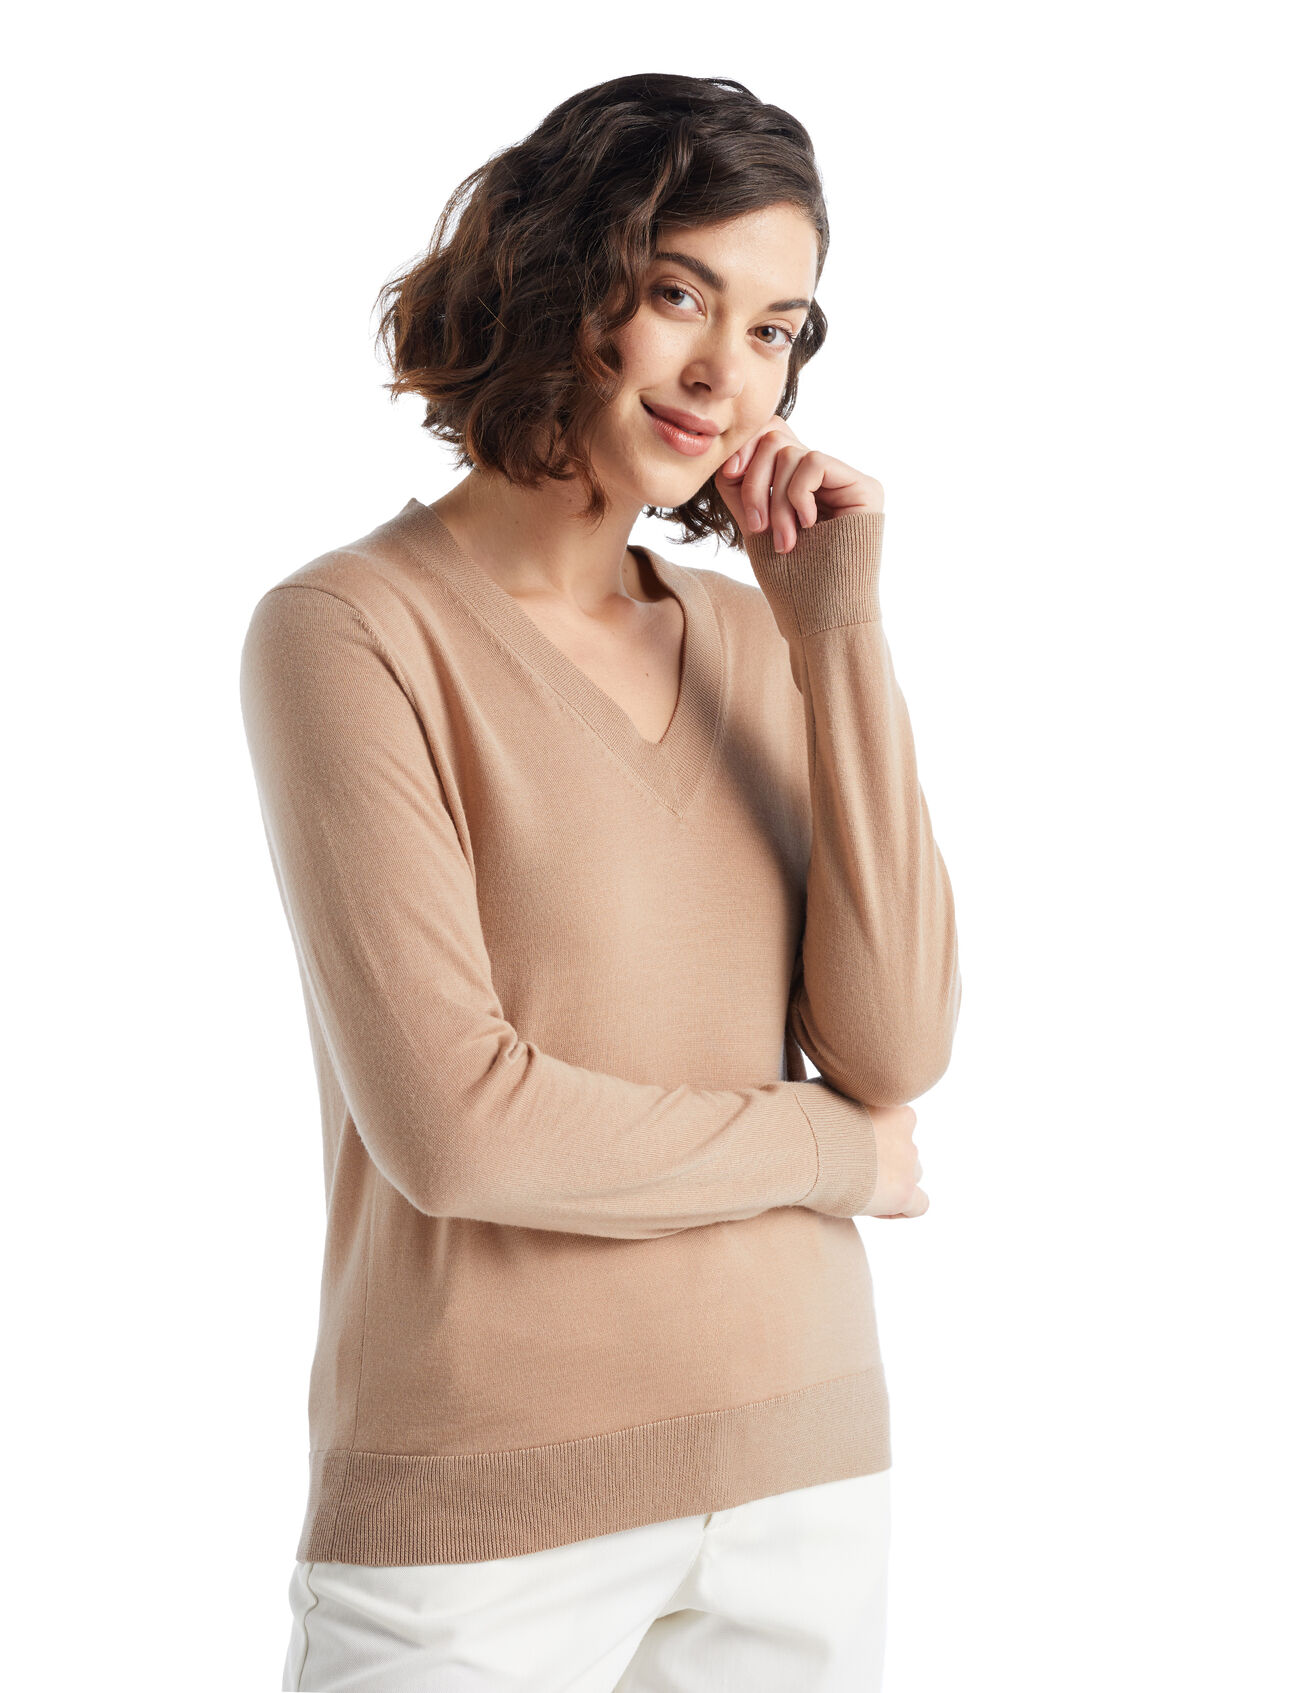 Womens Merino Wilcox Long Sleeve V Neck Sweater A classic everyday sweater made with ultra-fine gauge merino wool for unparalleled softness, the Wilcox Long Sleeve V Neck Sweater is perfect for days when you need a light extra layer.